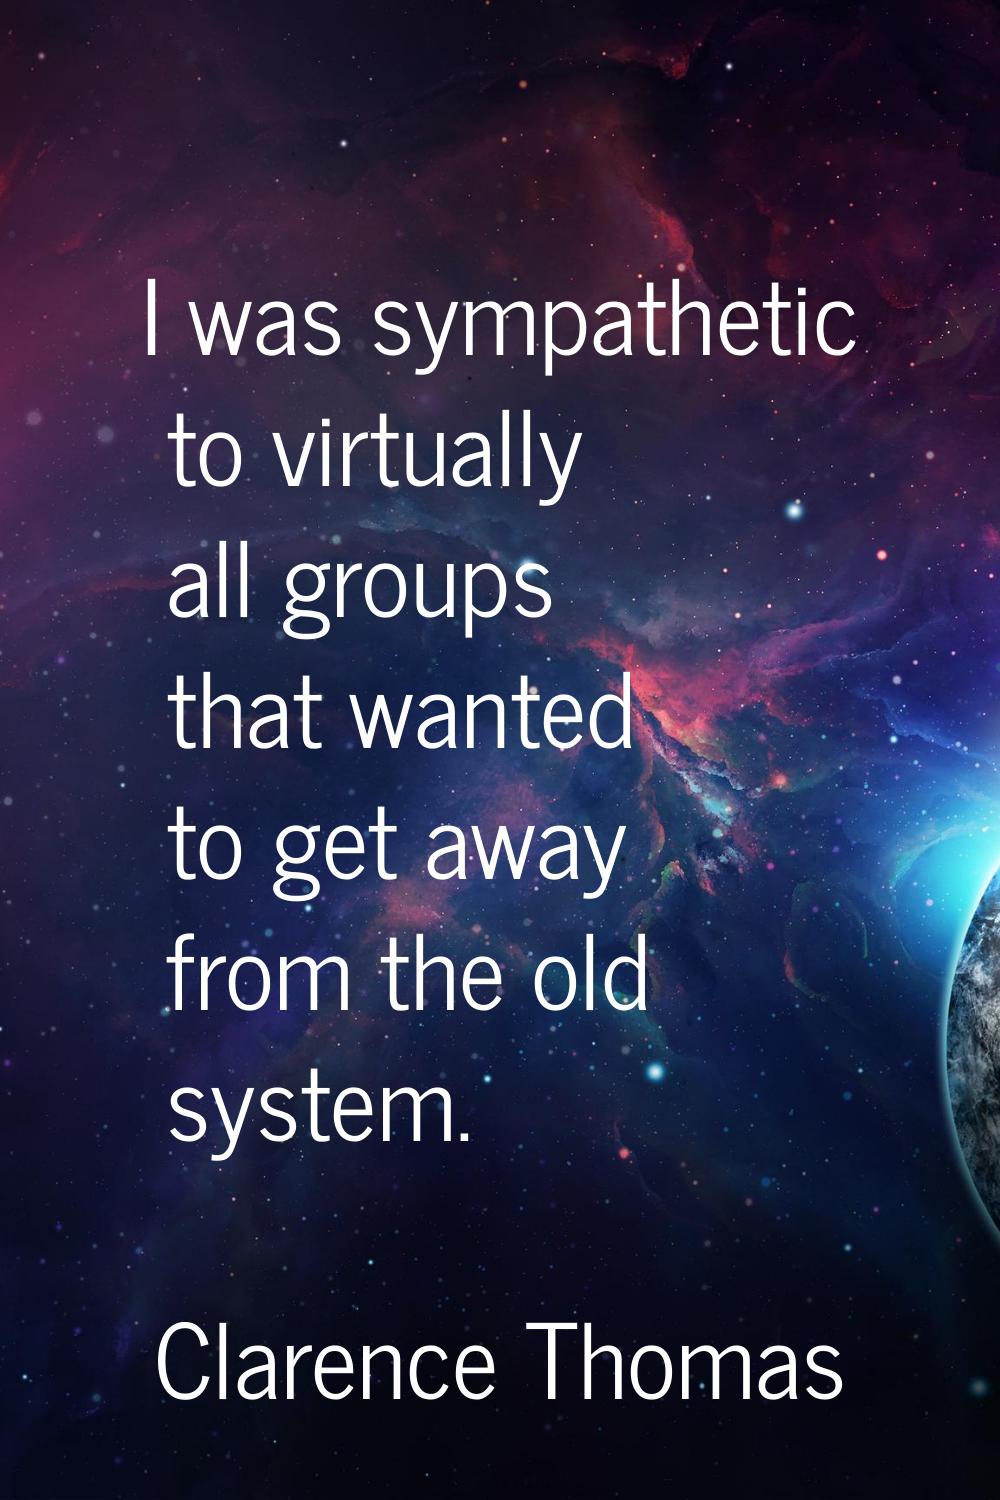 I was sympathetic to virtually all groups that wanted to get away from the old system.